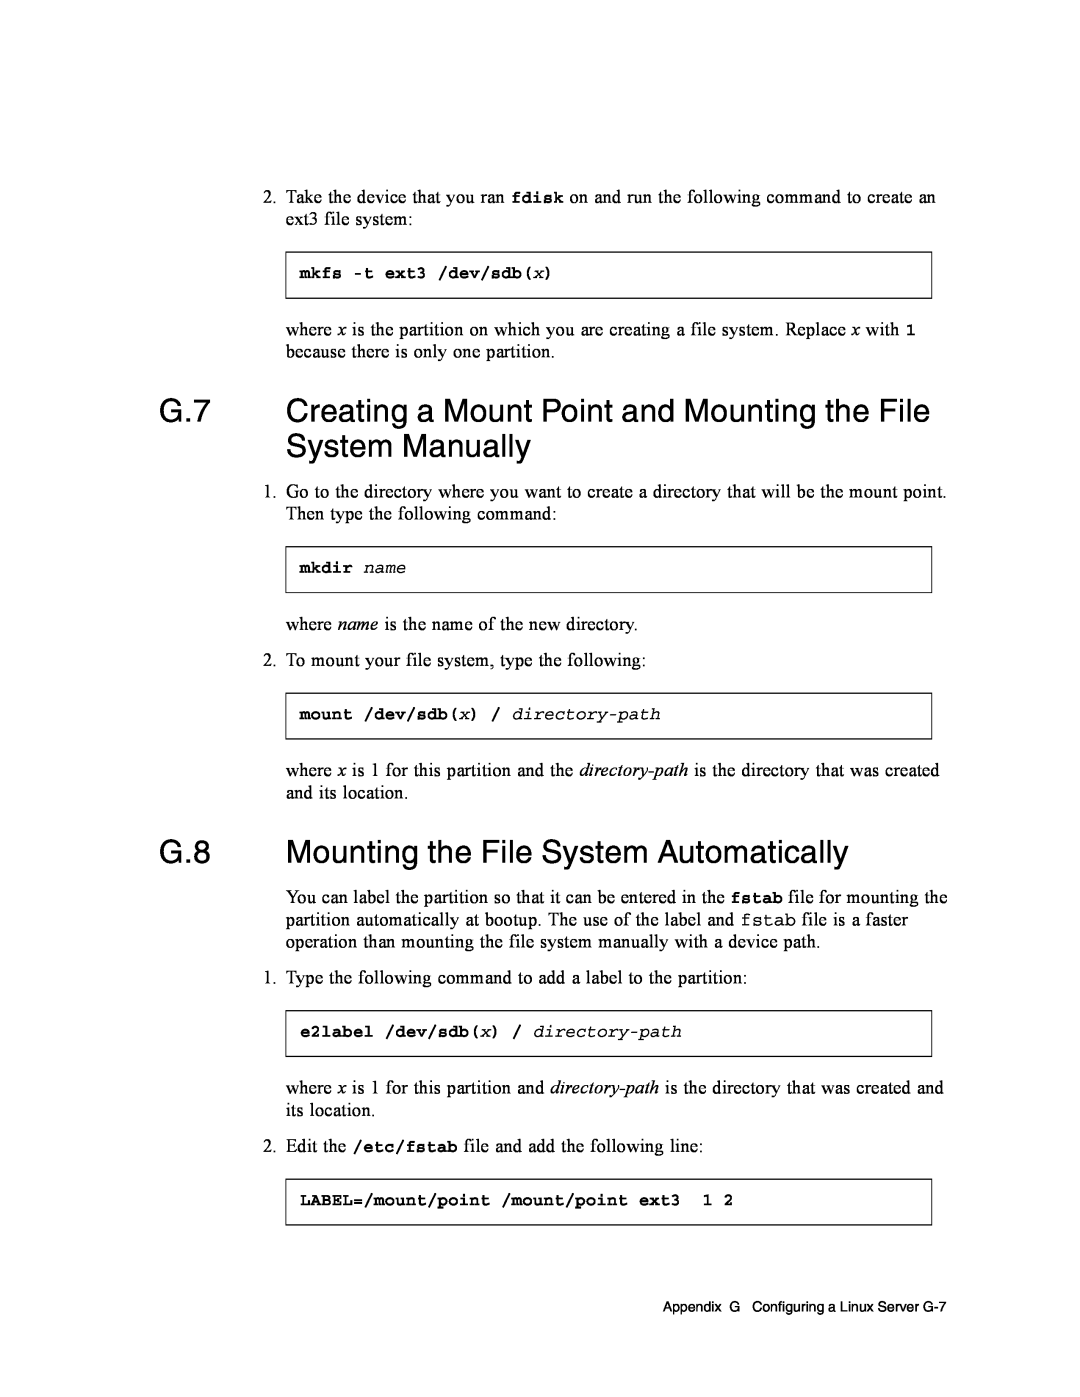 Dot Hill Systems II 200 FC service manual G.7 Creating a Mount Point and Mounting the File System Manually 